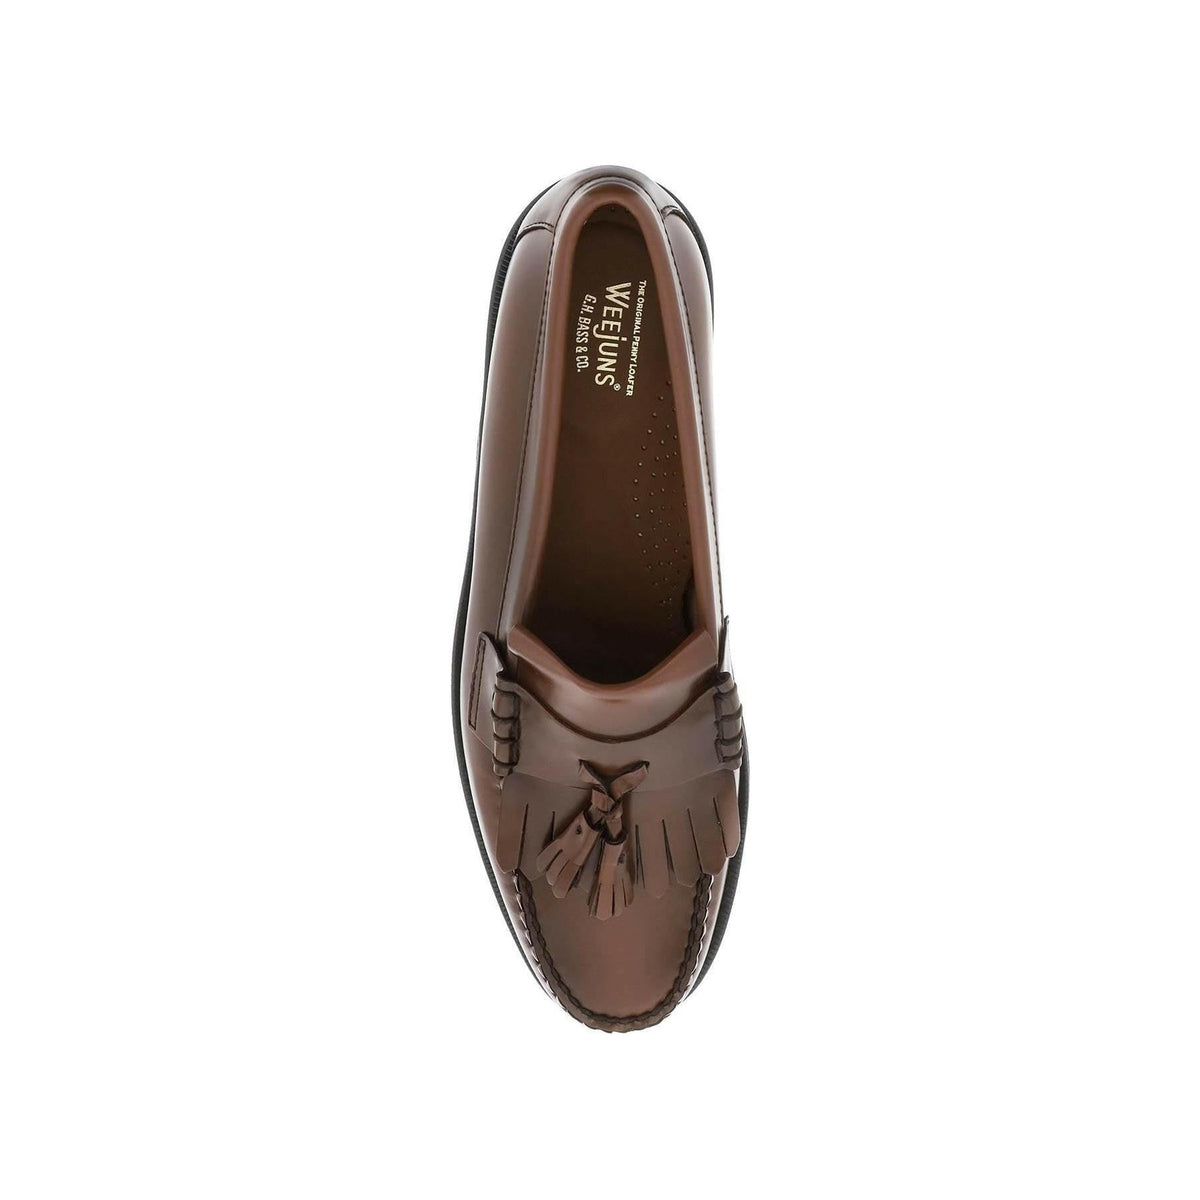 Mid Brown Leather Esther Kiltie Weejuns Loafers With Tassels G.H. BASS JOHN JULIA.